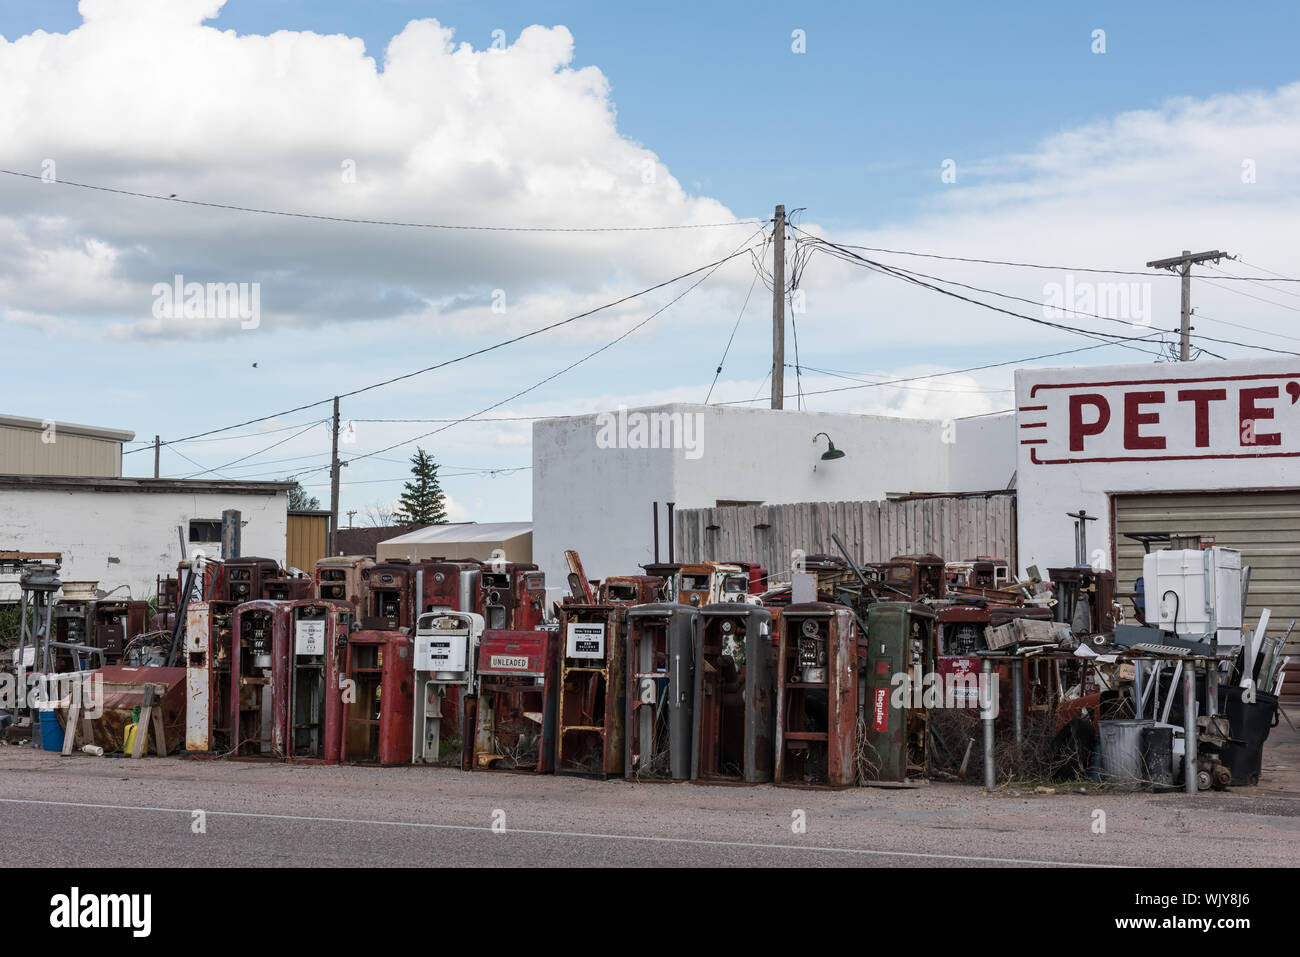 If you ever wondered where all the old gasoline pumps went when service stations closed or changed business purposes, some of them ended up at what was once an auto-service station, but became a second-hand store in Pine Bluffs, a small farming community on the Nebraska border in Laramie County, Wyoming Stock Photo